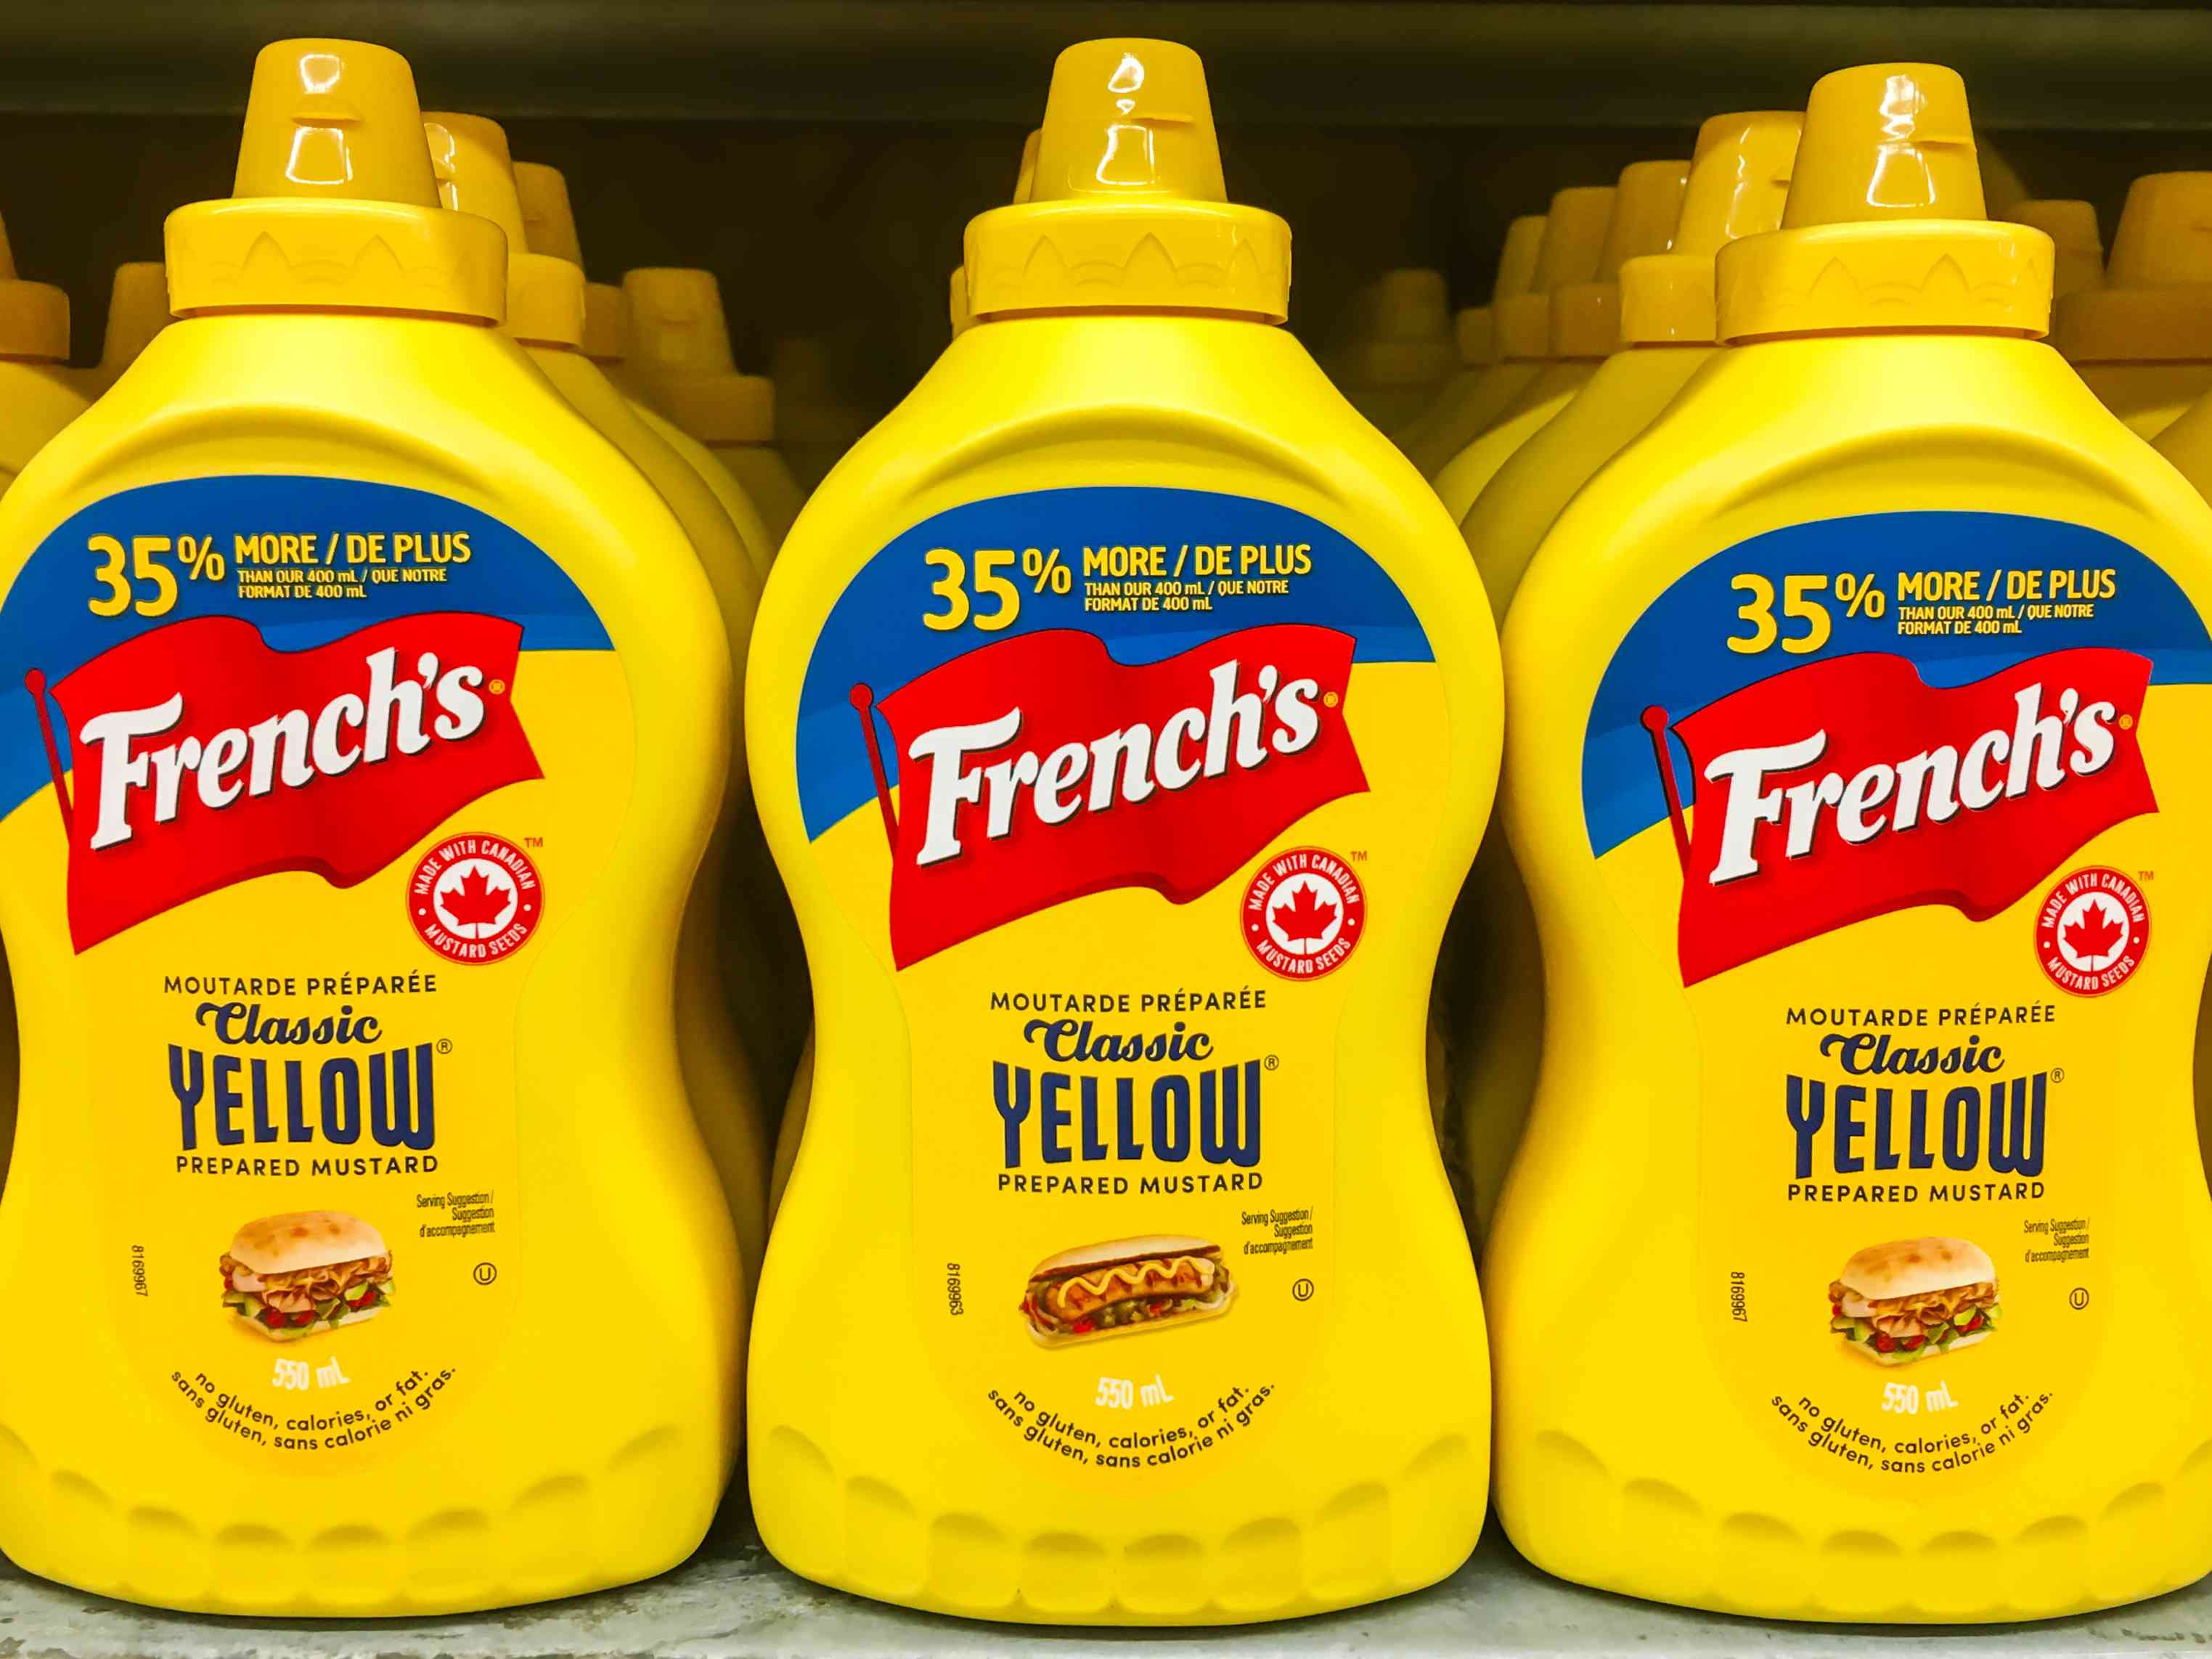 the only way you should store mustard, according to french’s